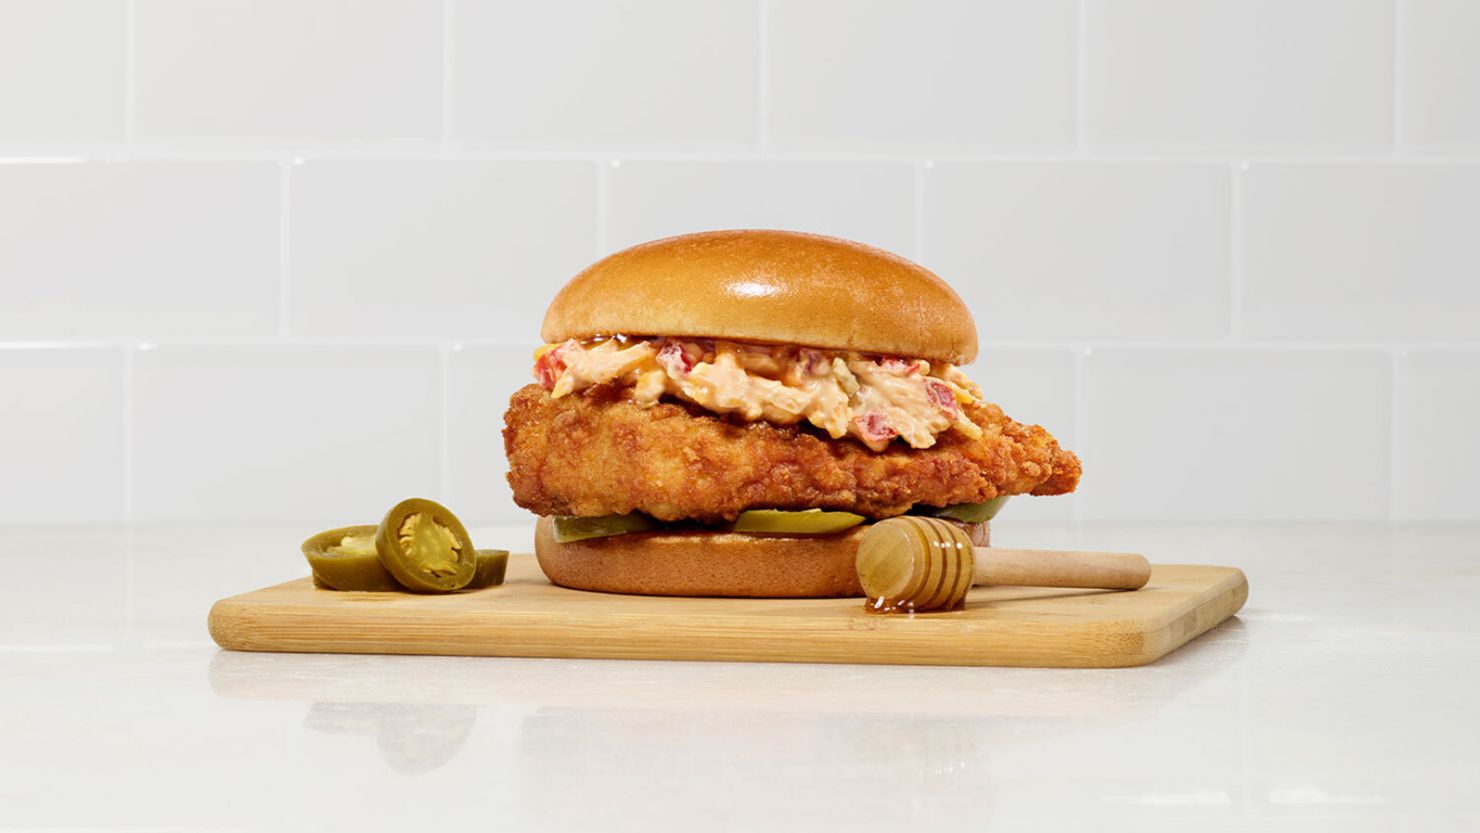 Chick-fil-A's new creation and limited-time offer, the honey pepper pimento cheese sandwich.